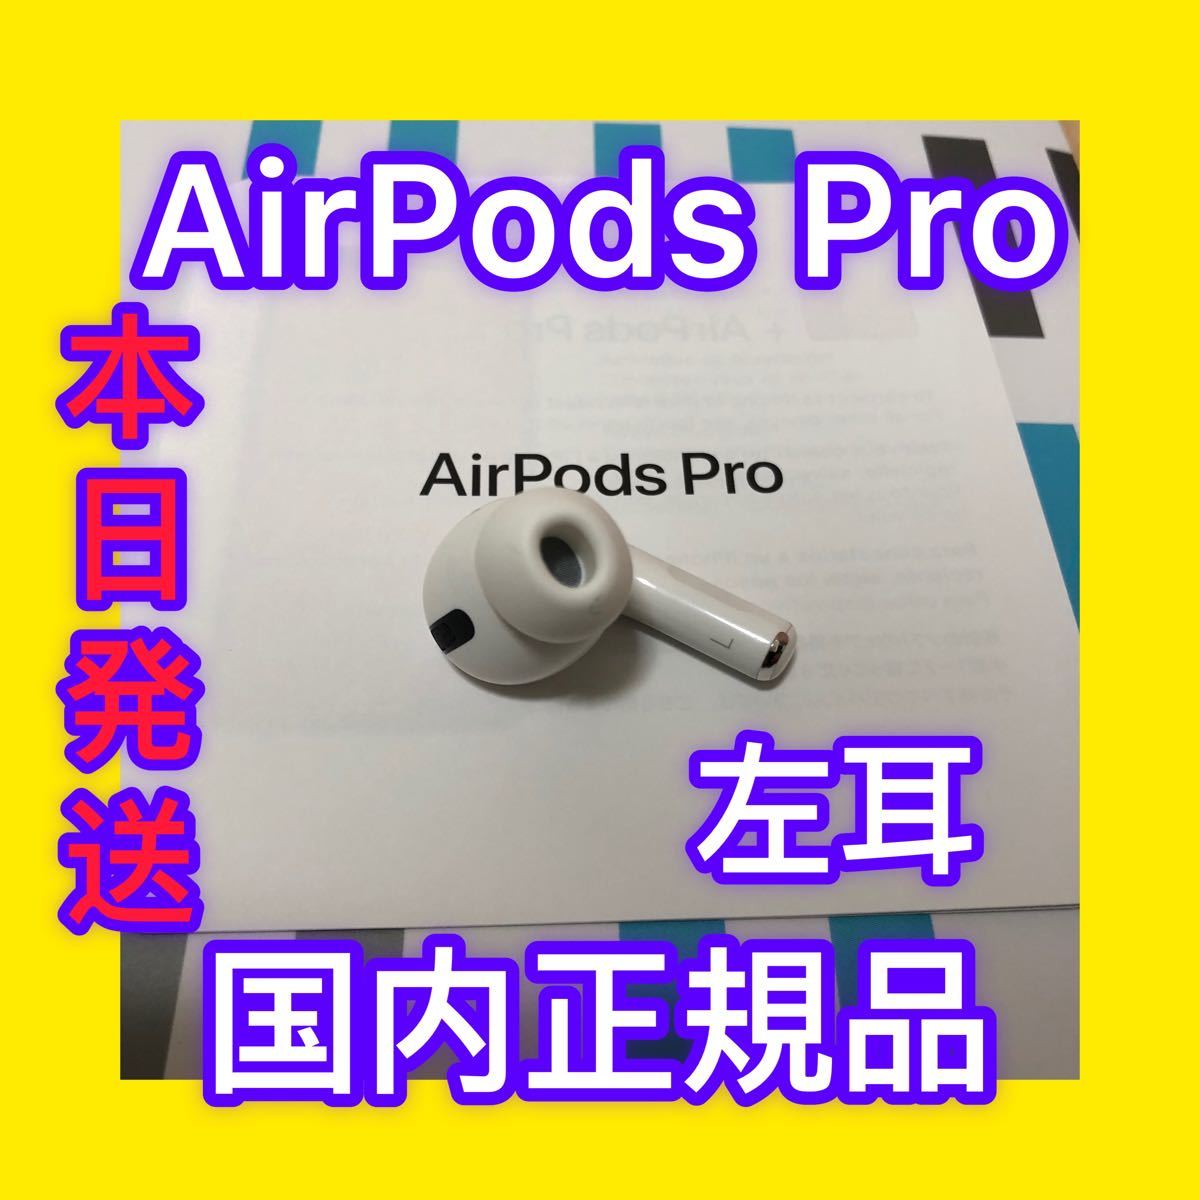 AirPods Pro 第一世代 左耳のみ 国内正規品｜PayPayフリマ